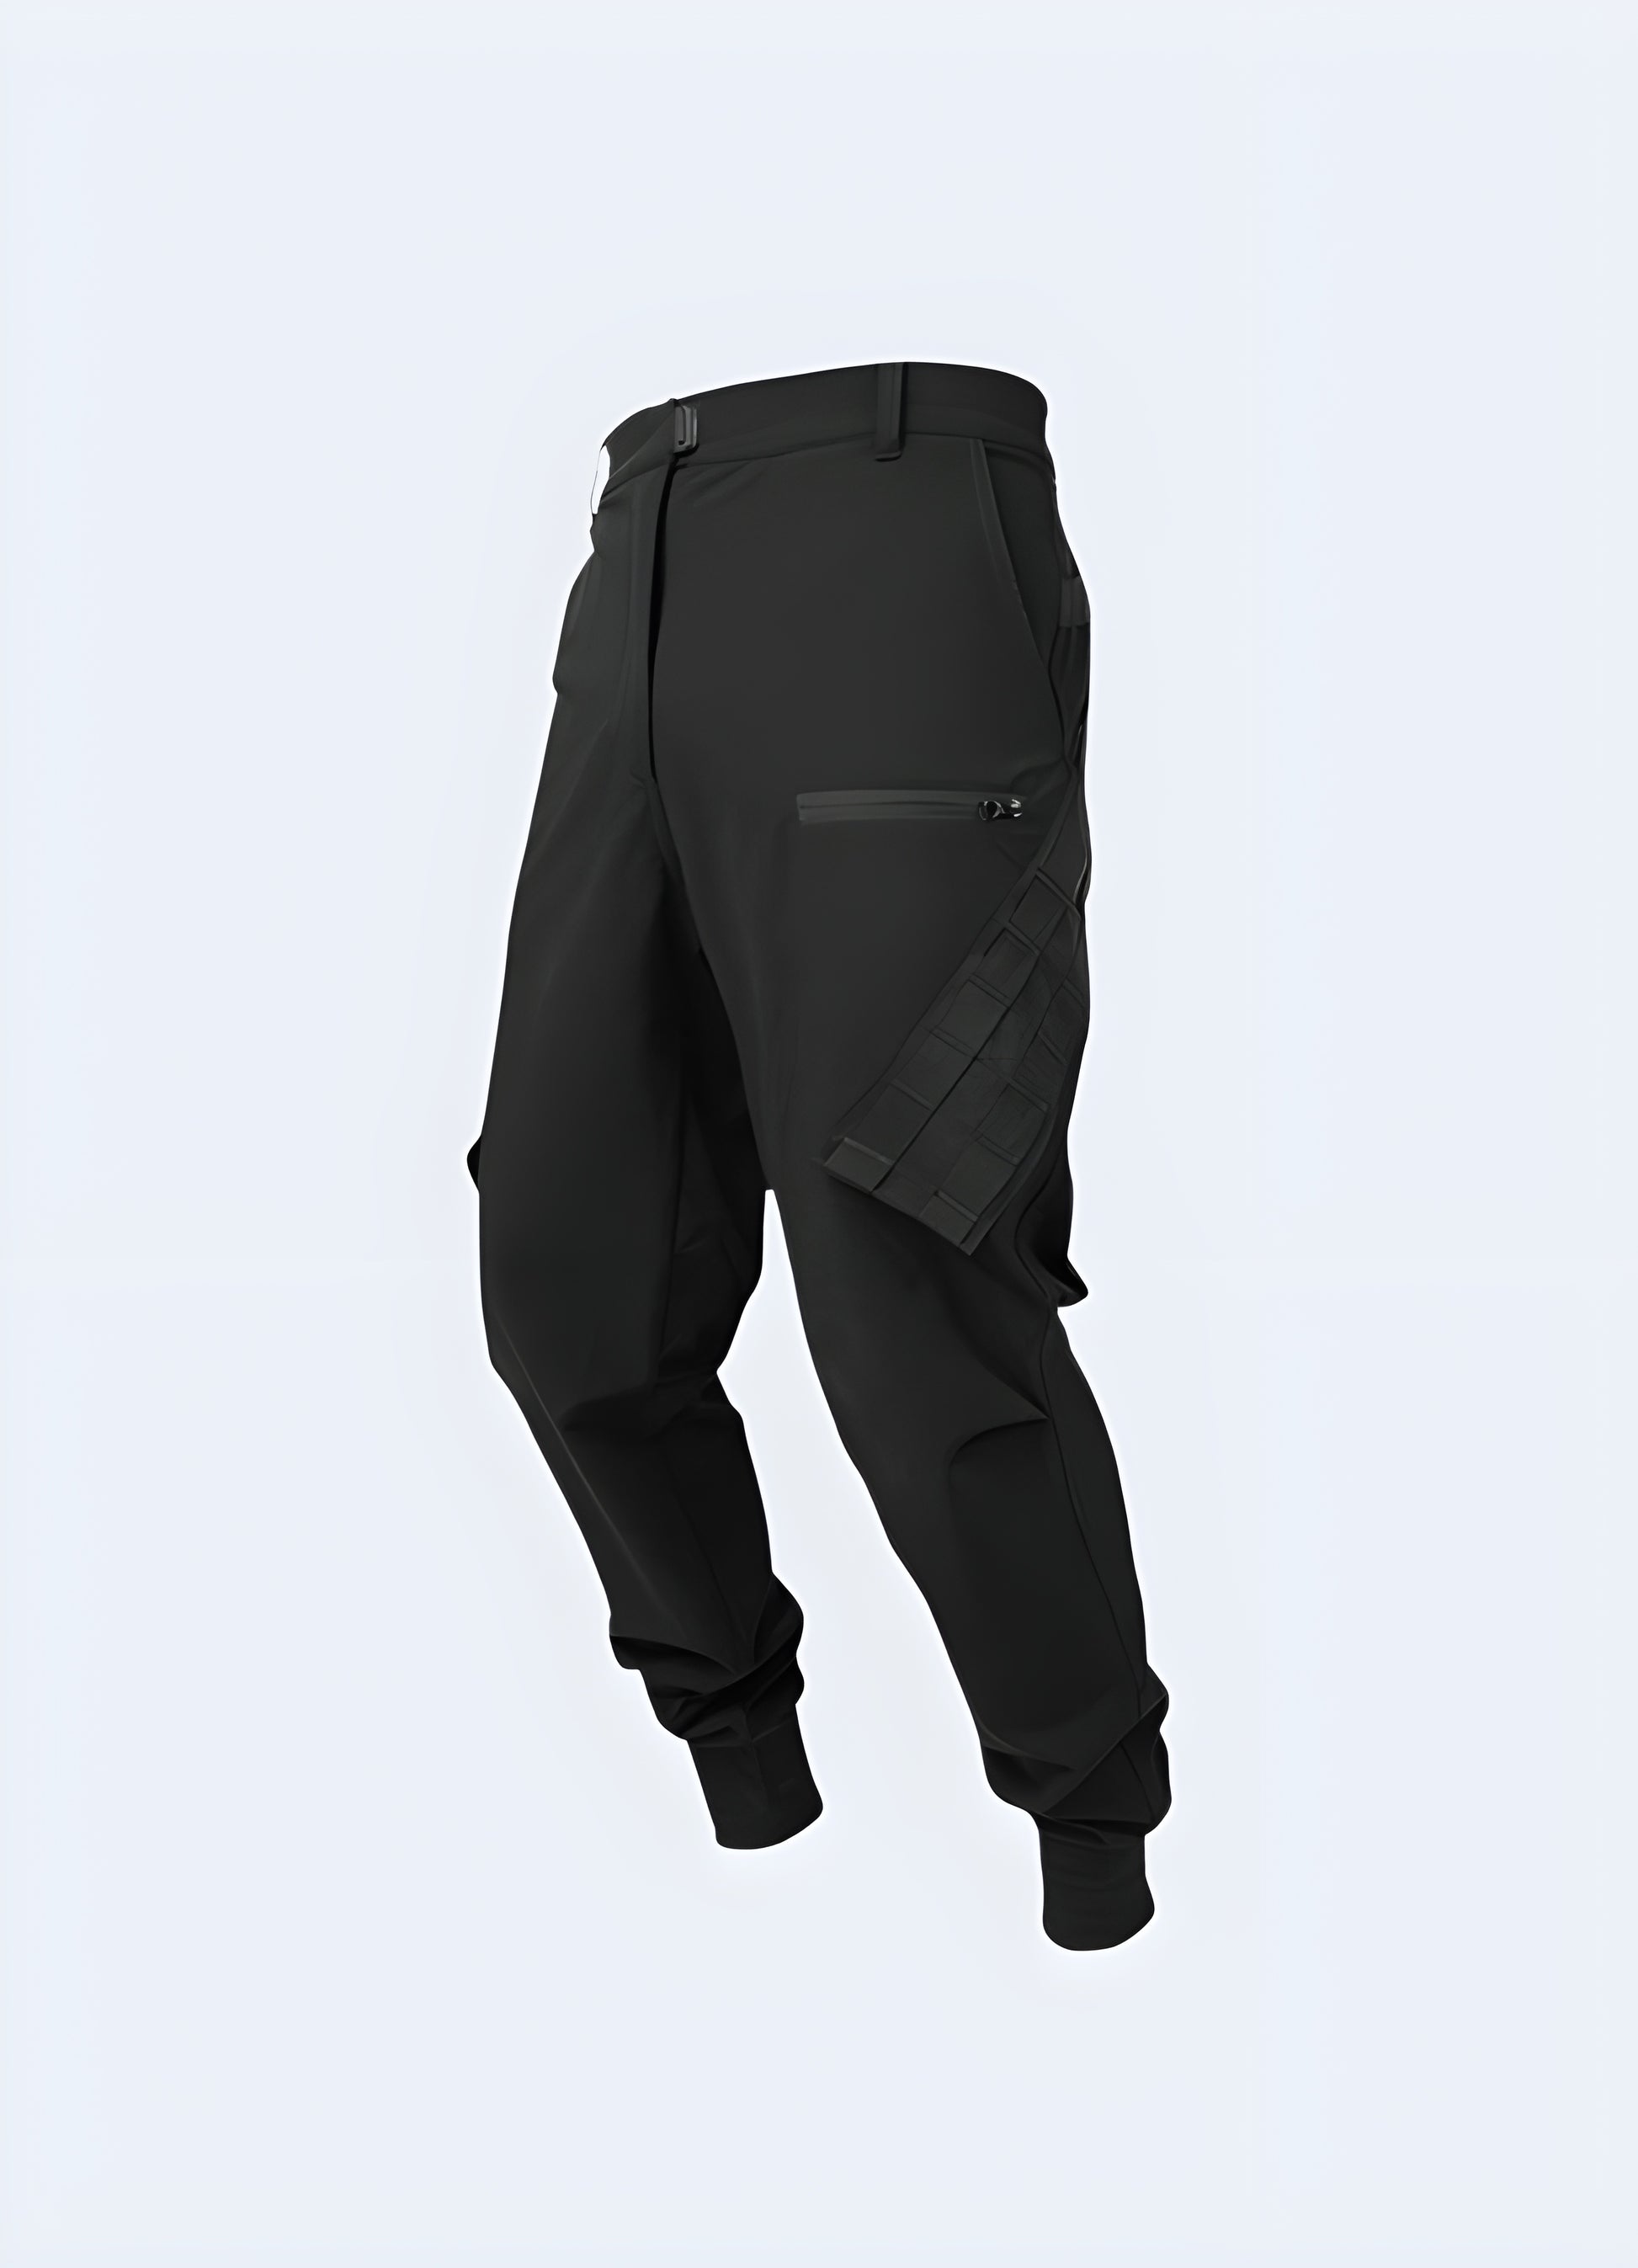 These softshell pants protect you from the elements and complete your outfit. 